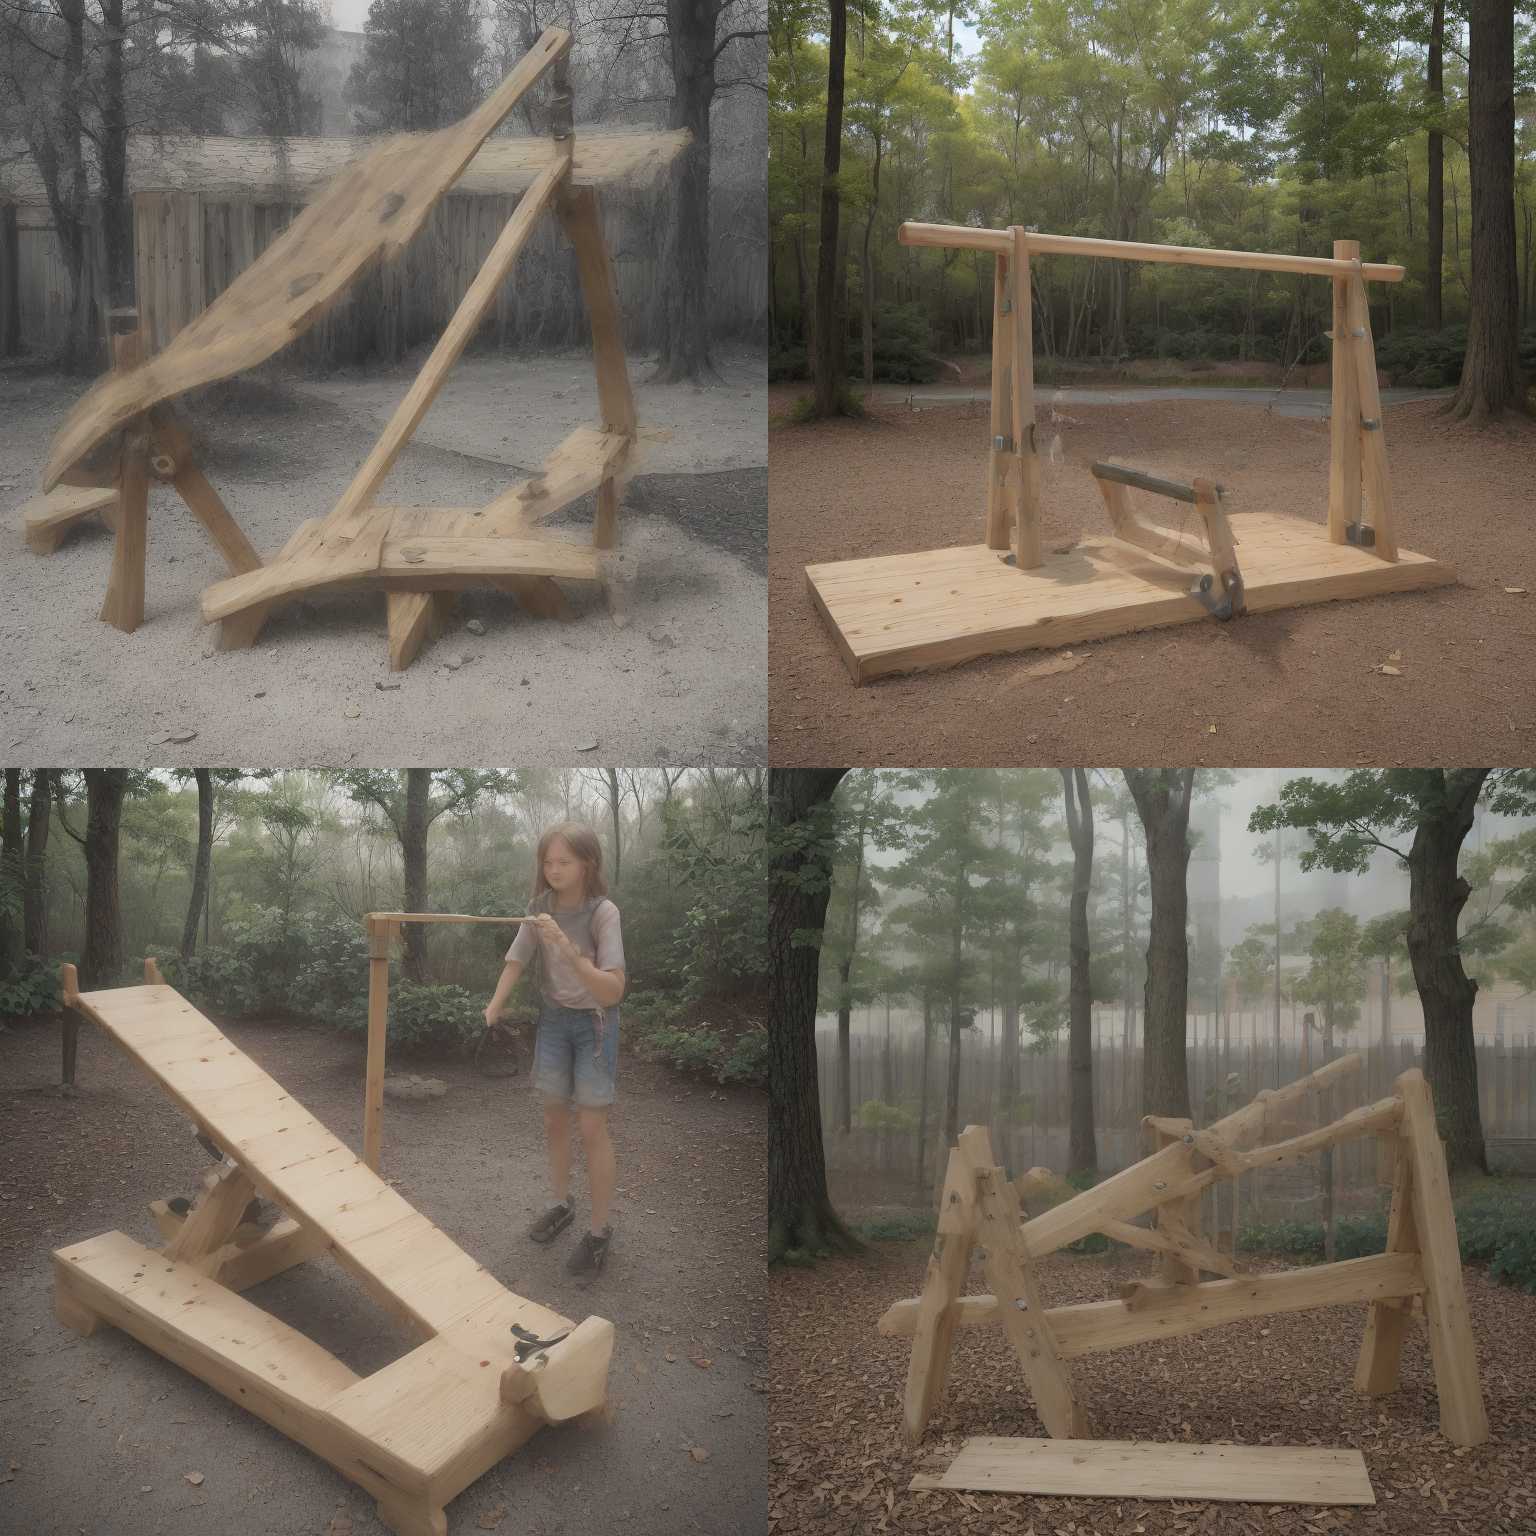 A seesaw with even weights on both sides